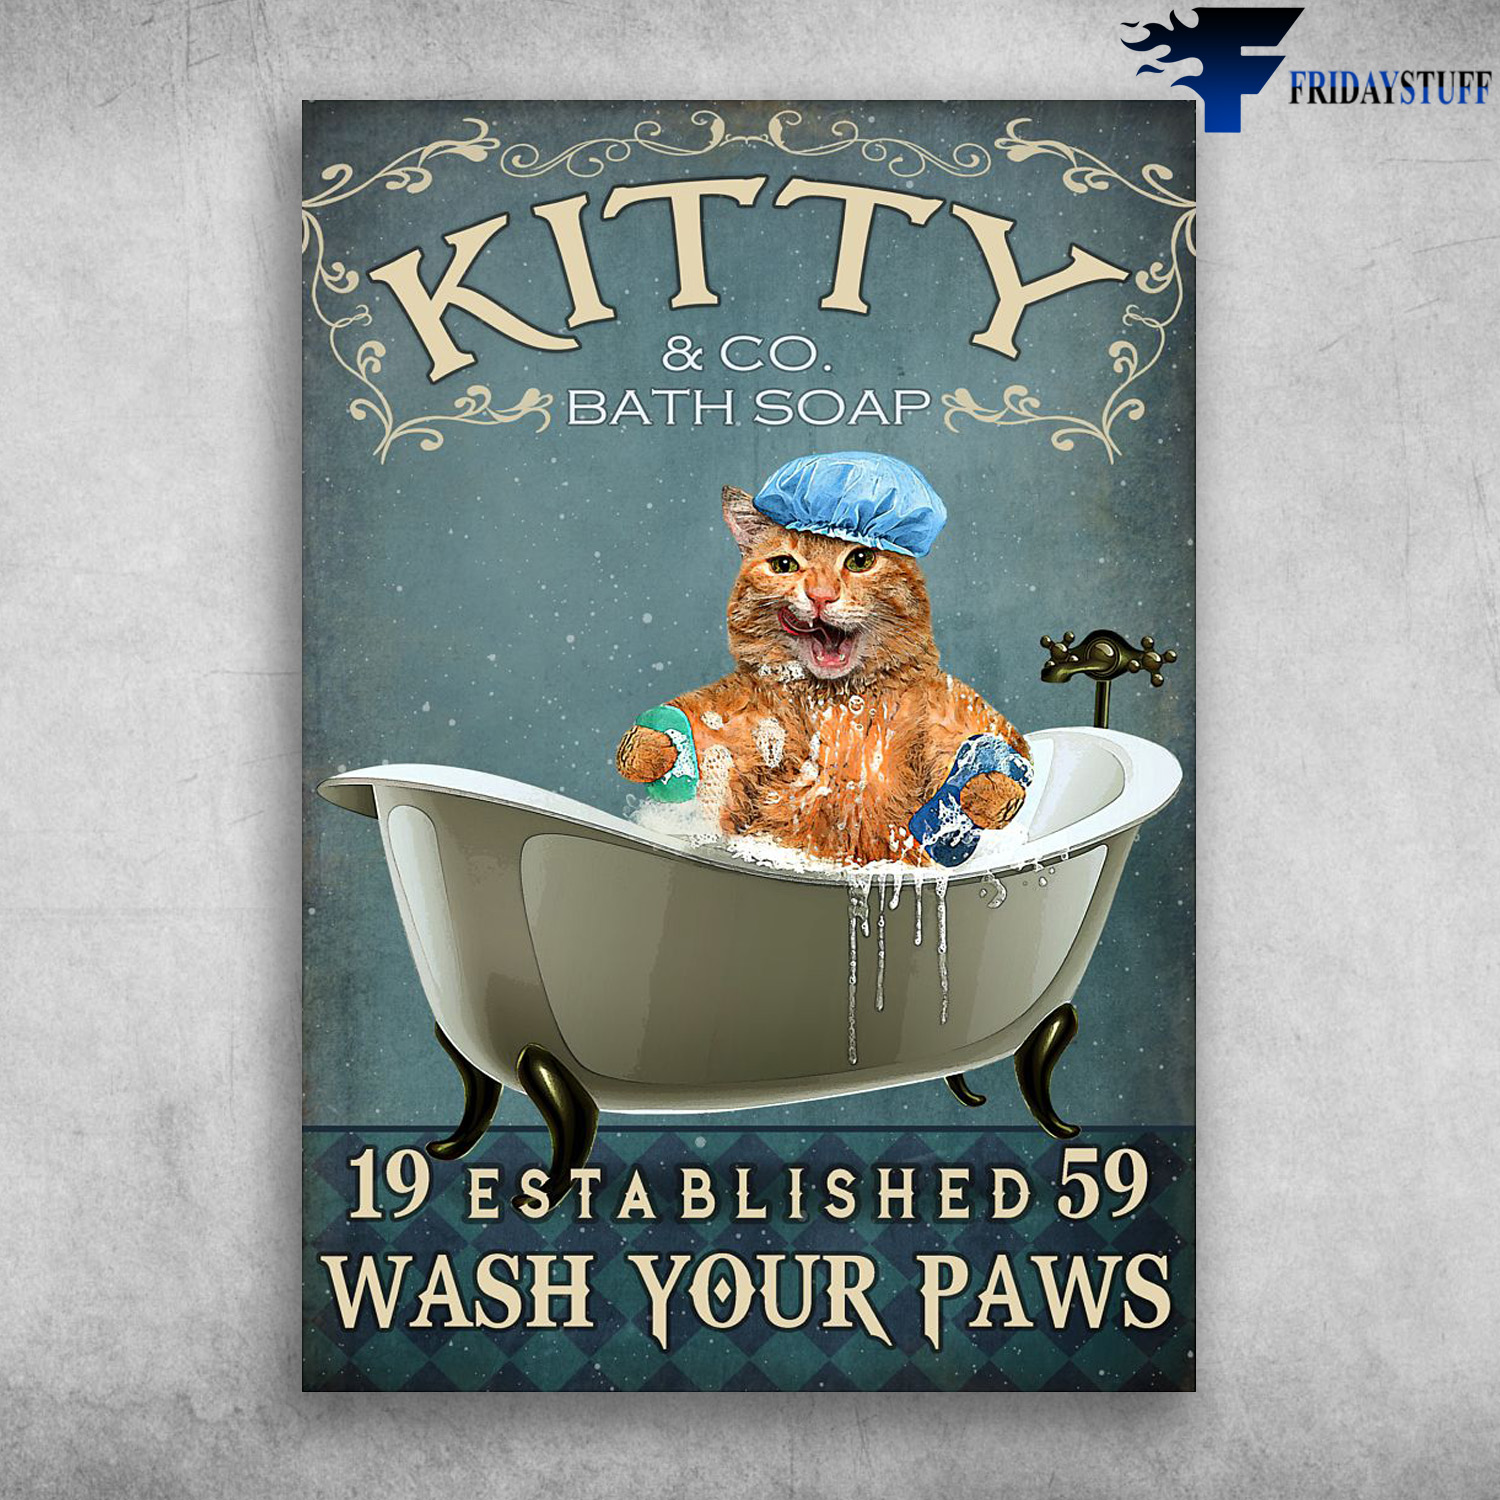 Cat In Bath - Kitty, And CO. Bath Soap, 19 Estabished 59, Wash Your Paws